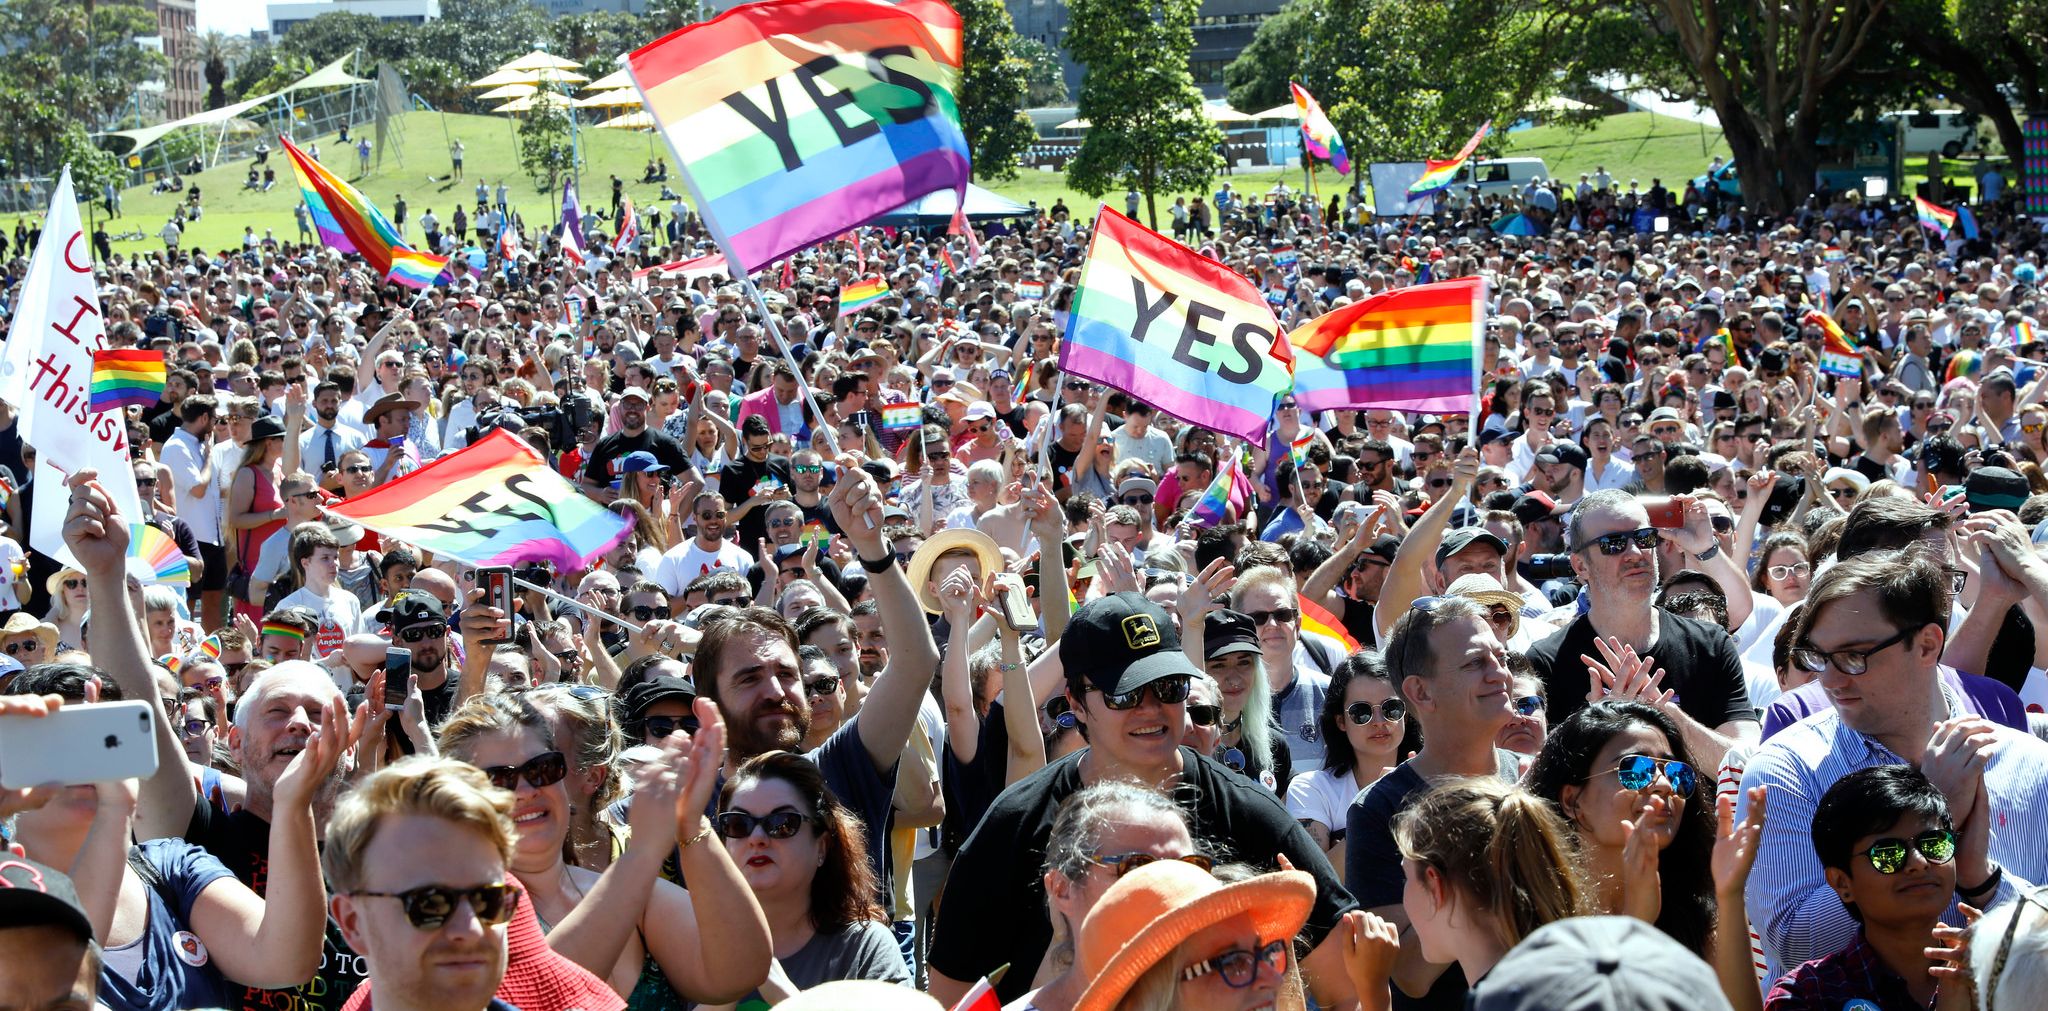 Australia’s hilarious and touching reactions to marriage equality